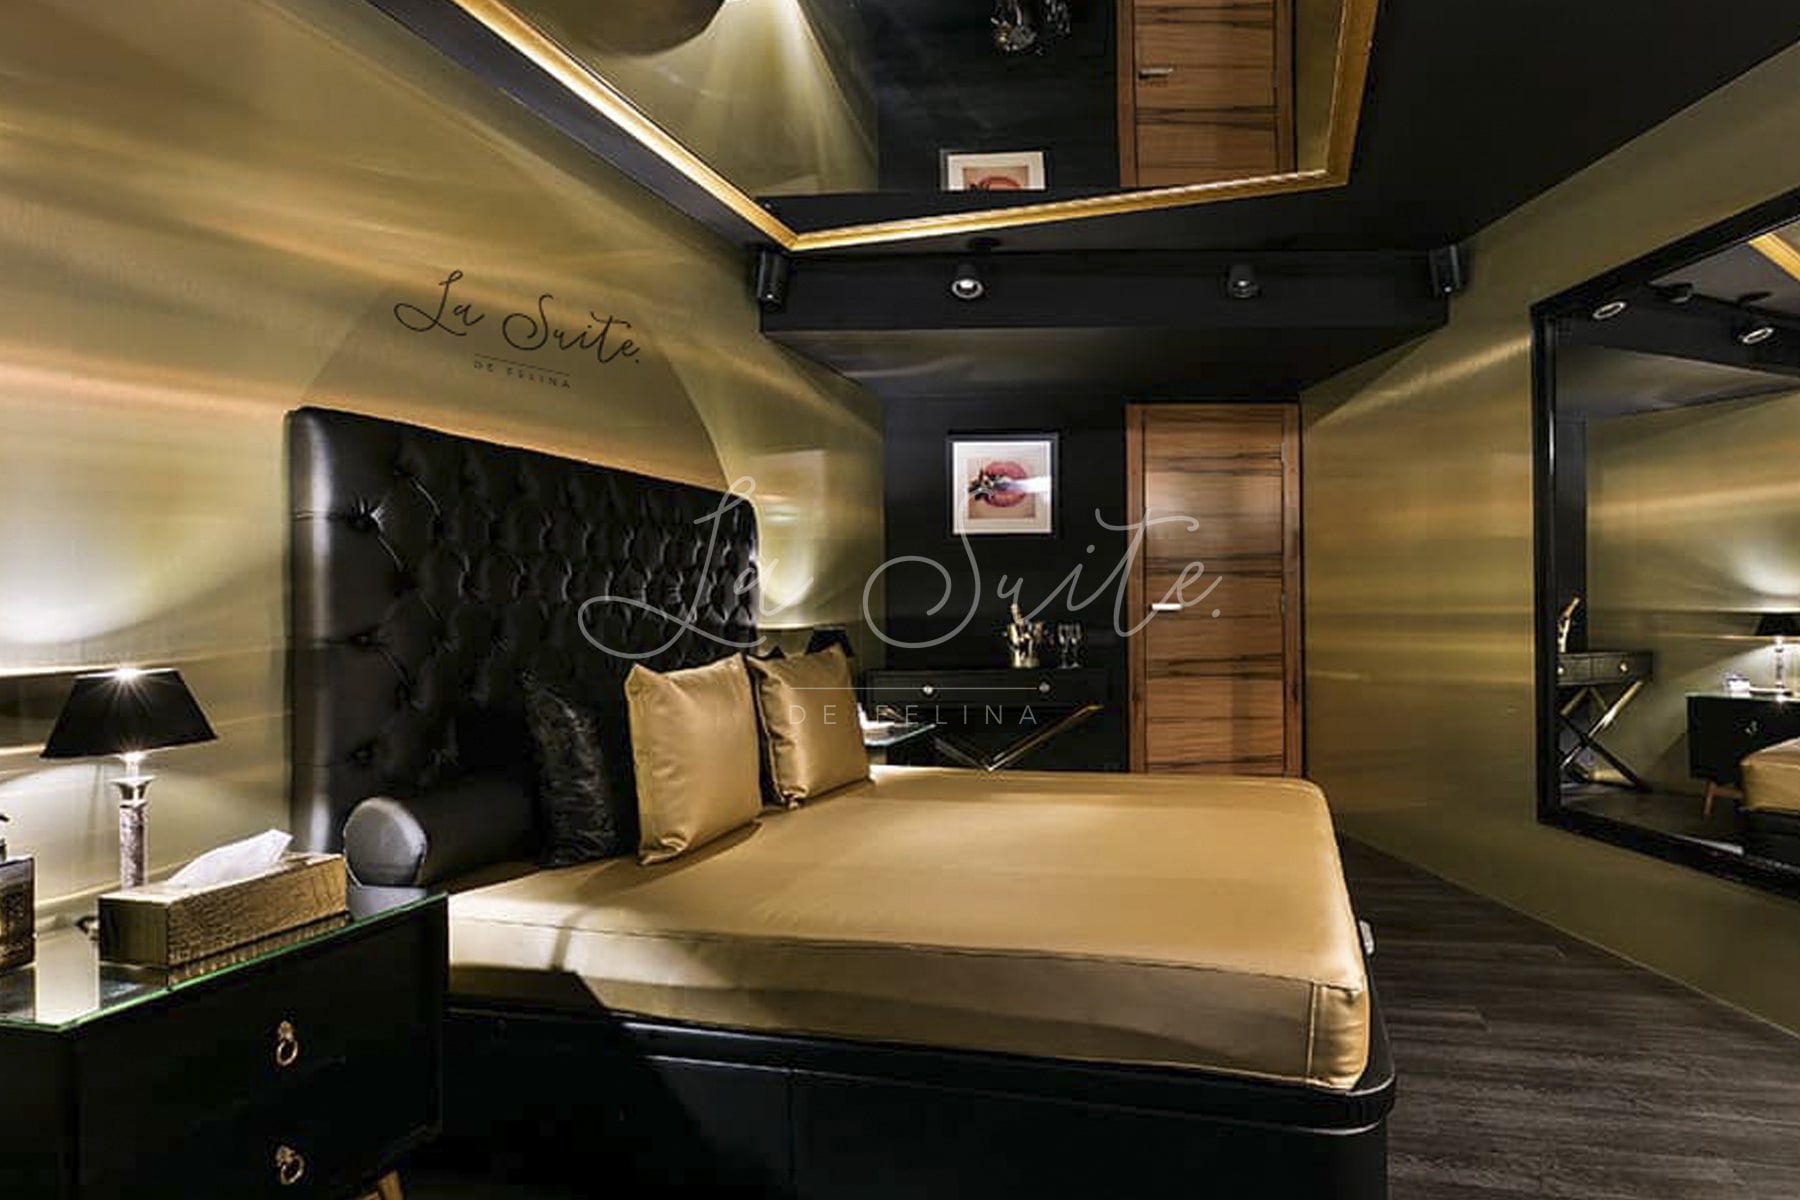 LUXURY room, gold and black walls, ebony wood finishes and gold furnishings at La Suite, Barcelona